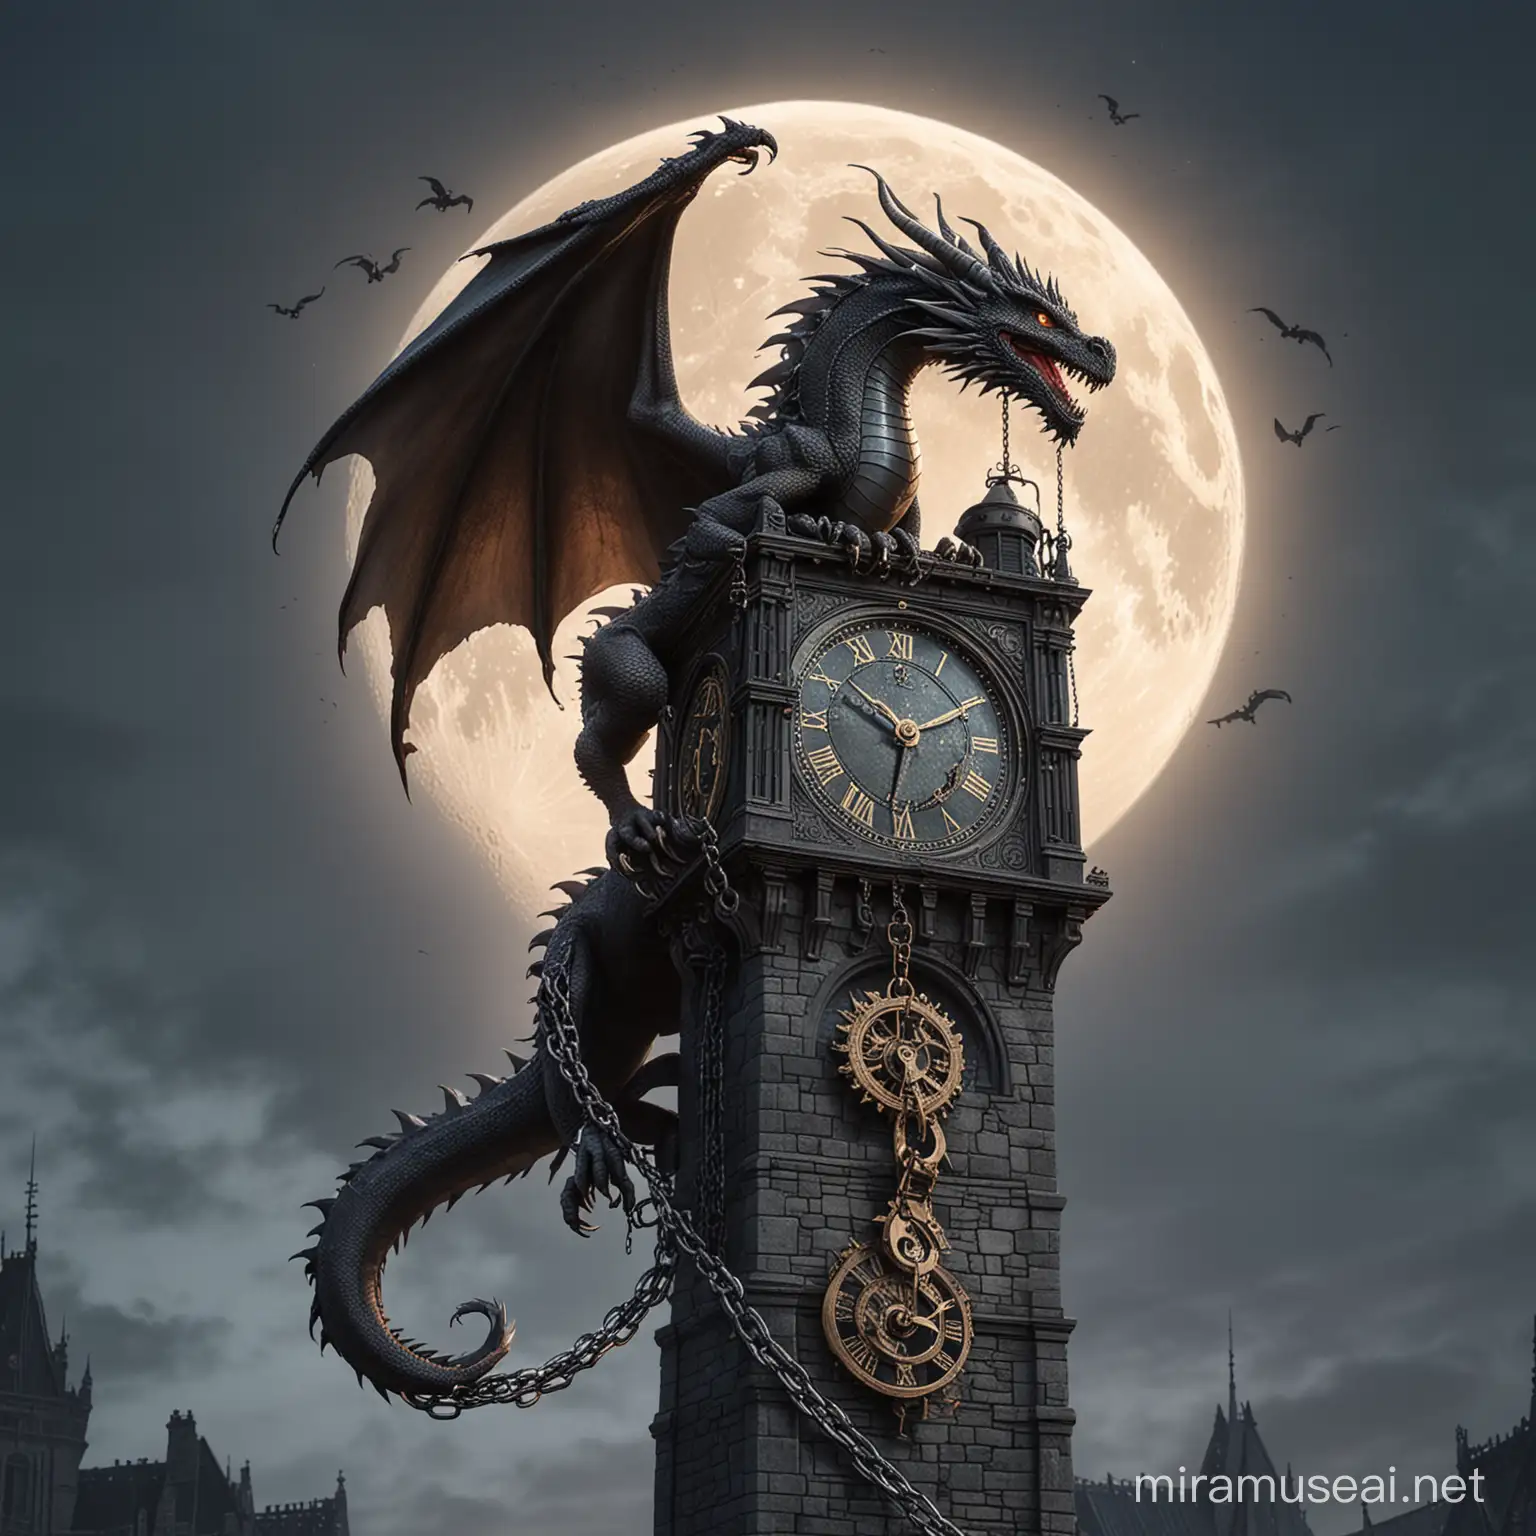 Dragon Climbing Clock Tower with Moon Background and Broken Chains